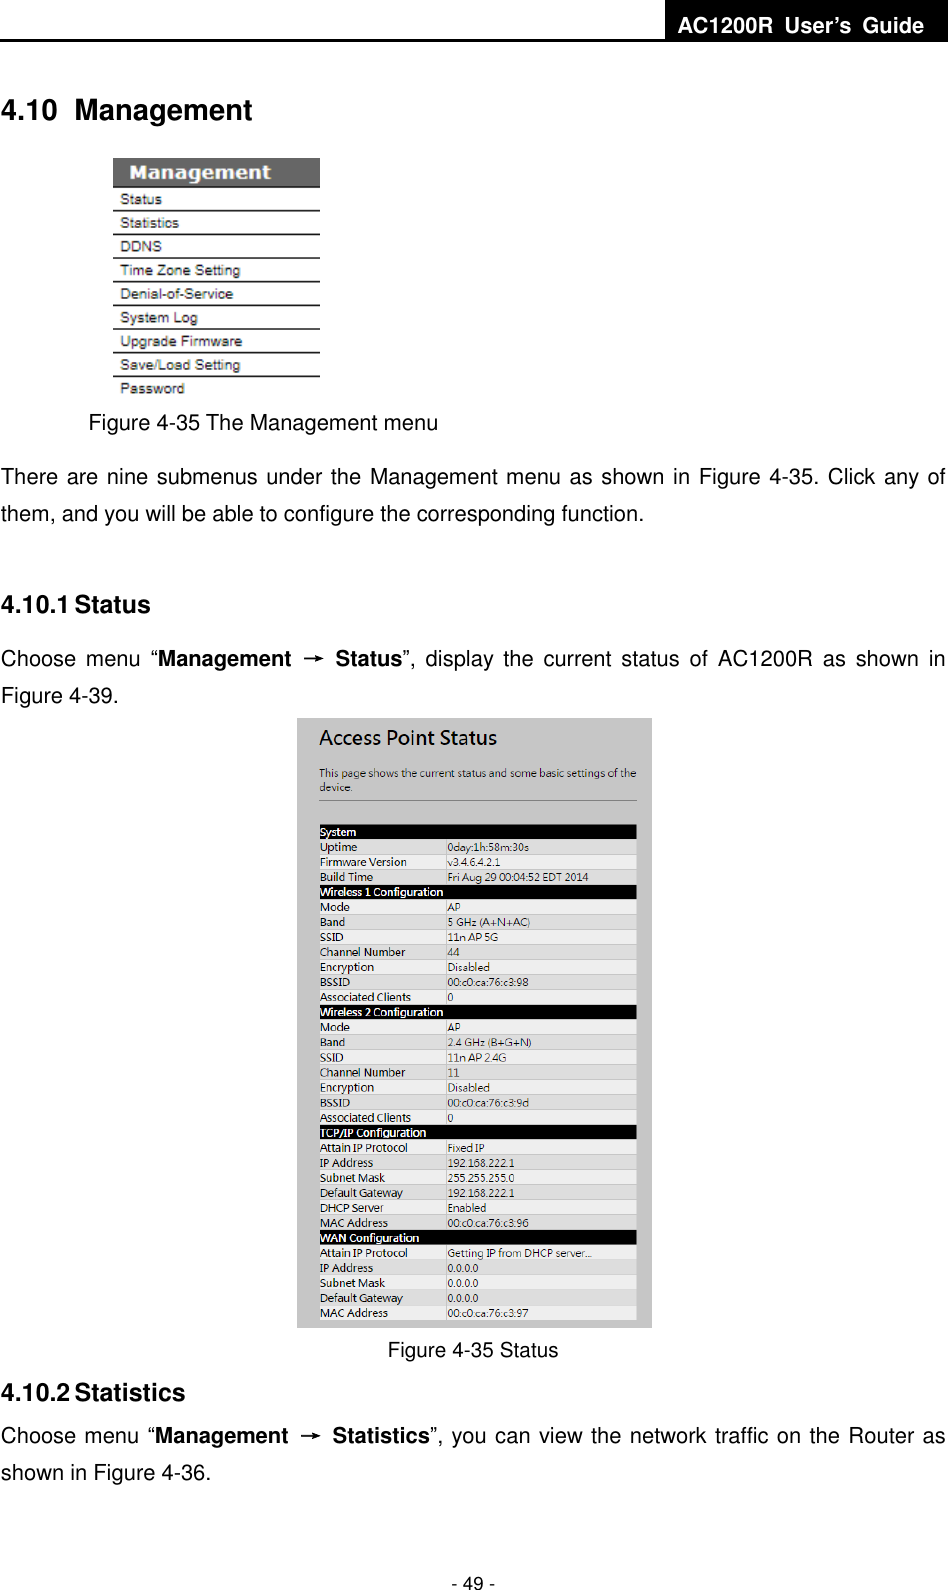  AC1200R  User’s  Guide  - 49 - 4.10   Management    Figure 4-35 The Management menu There are nine submenus under the Management menu as shown in Figure 4-35. Click any of them, and you will be able to configure the corresponding function.  4.10.1 Status Choose menu  “Management  →  Status”,  display the current  status  of  AC1200R  as  shown  in Figure 4-39.  Figure 4-35 Status   4.10.2 Statistics Choose menu “Management  →  Statistics”, you can view the network traffic on the Router as shown in Figure 4-36.   